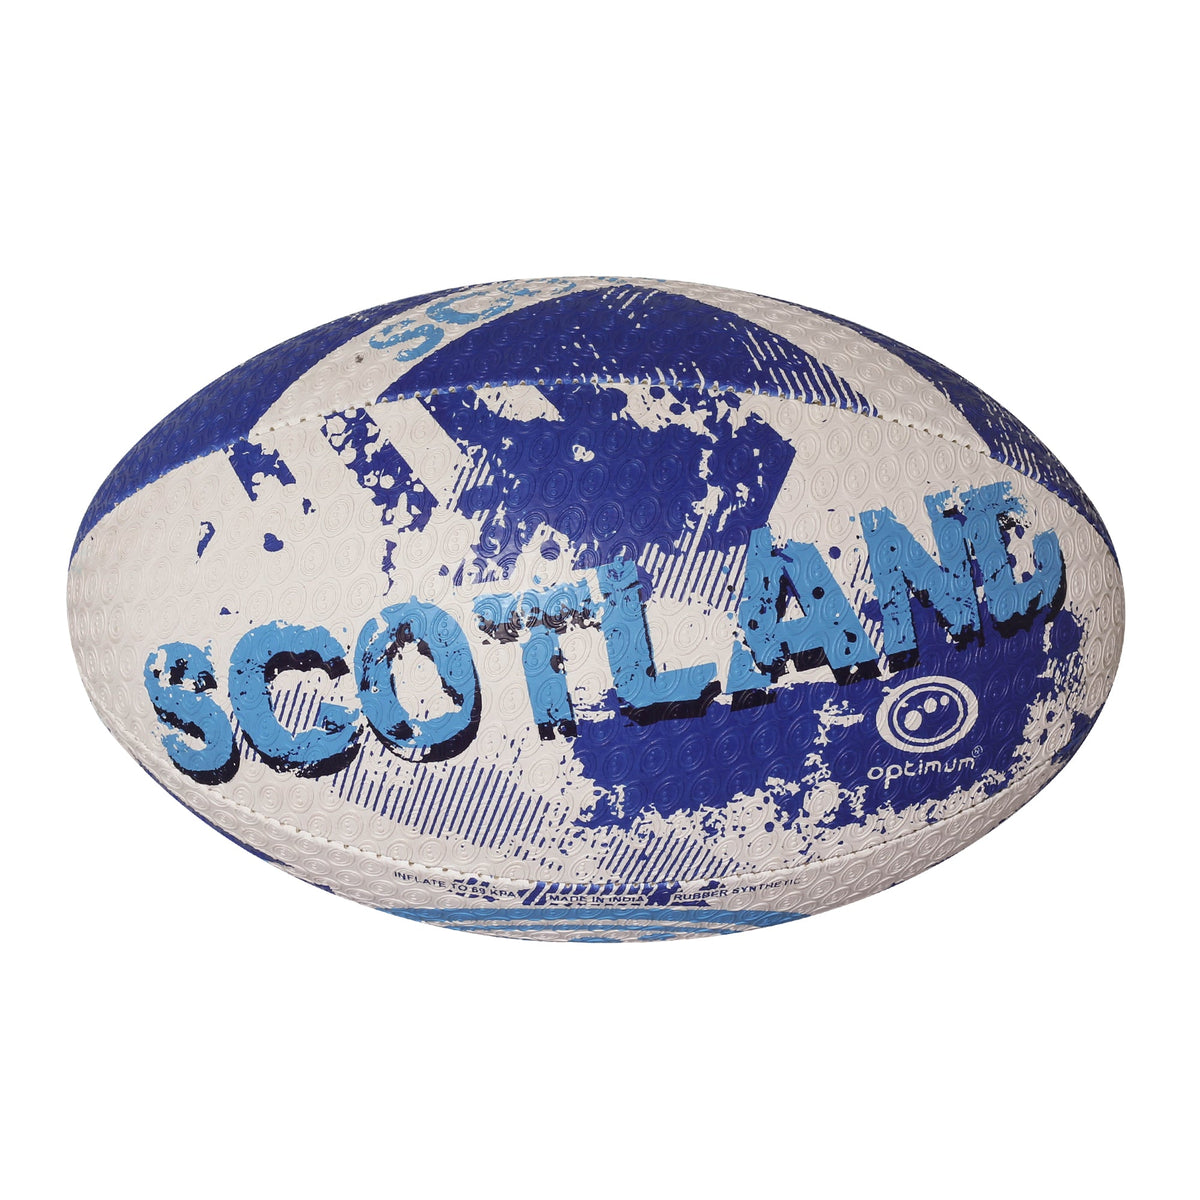 Nations Rugby Ball - Optimum